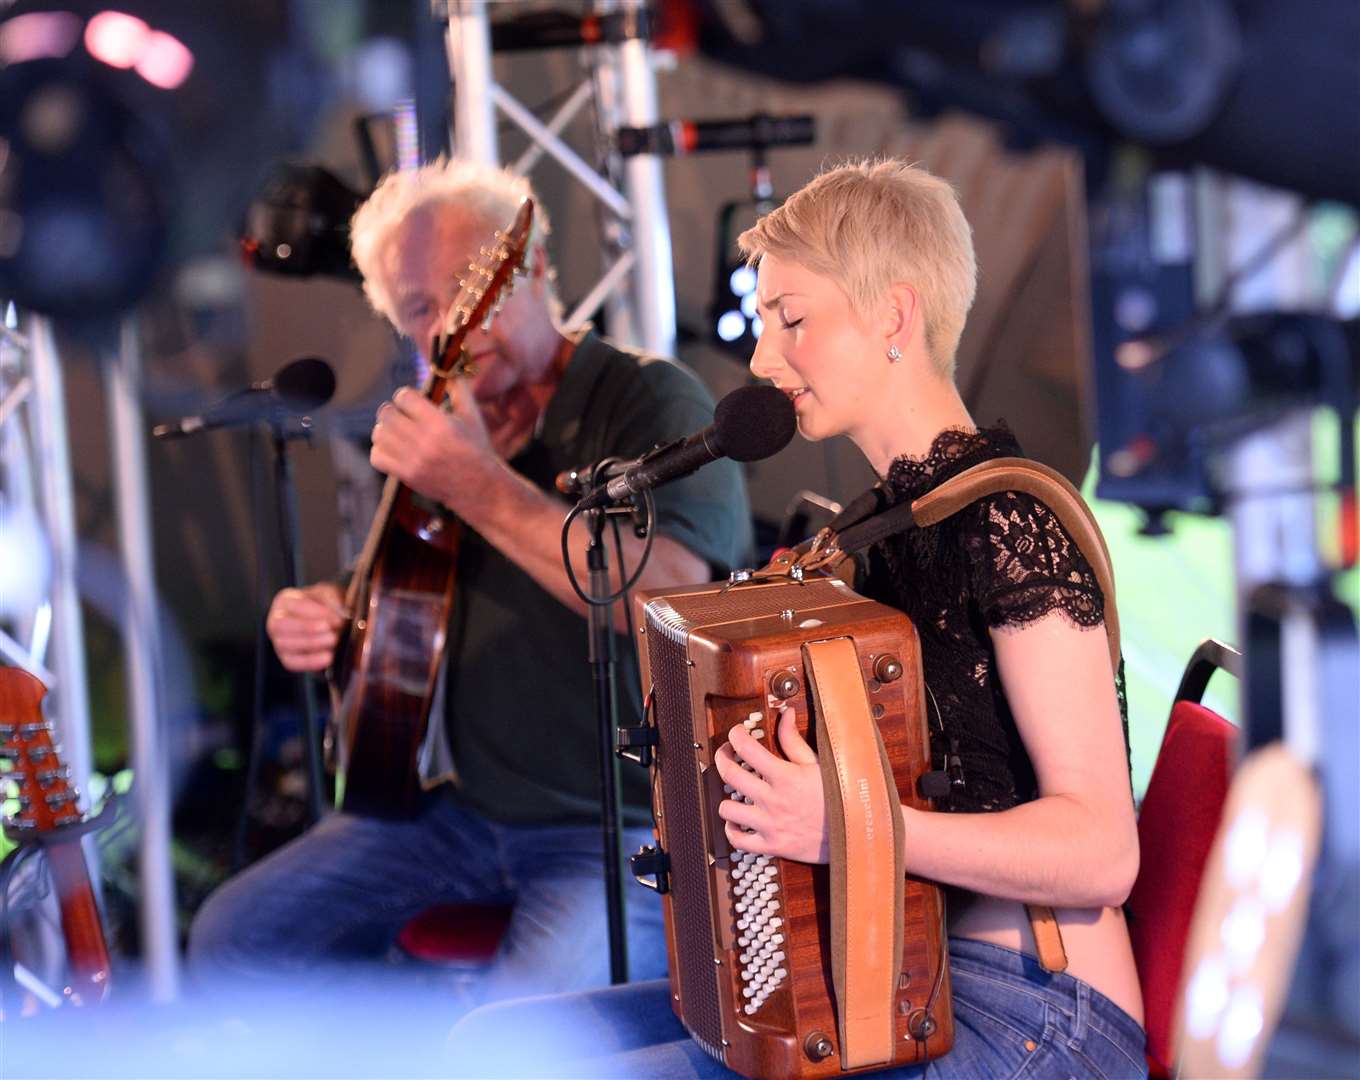 Local musicians have been a mainstay of Eden Court's summer Under Canvas event, but they could also have an important role in helping the return of live entertainment.